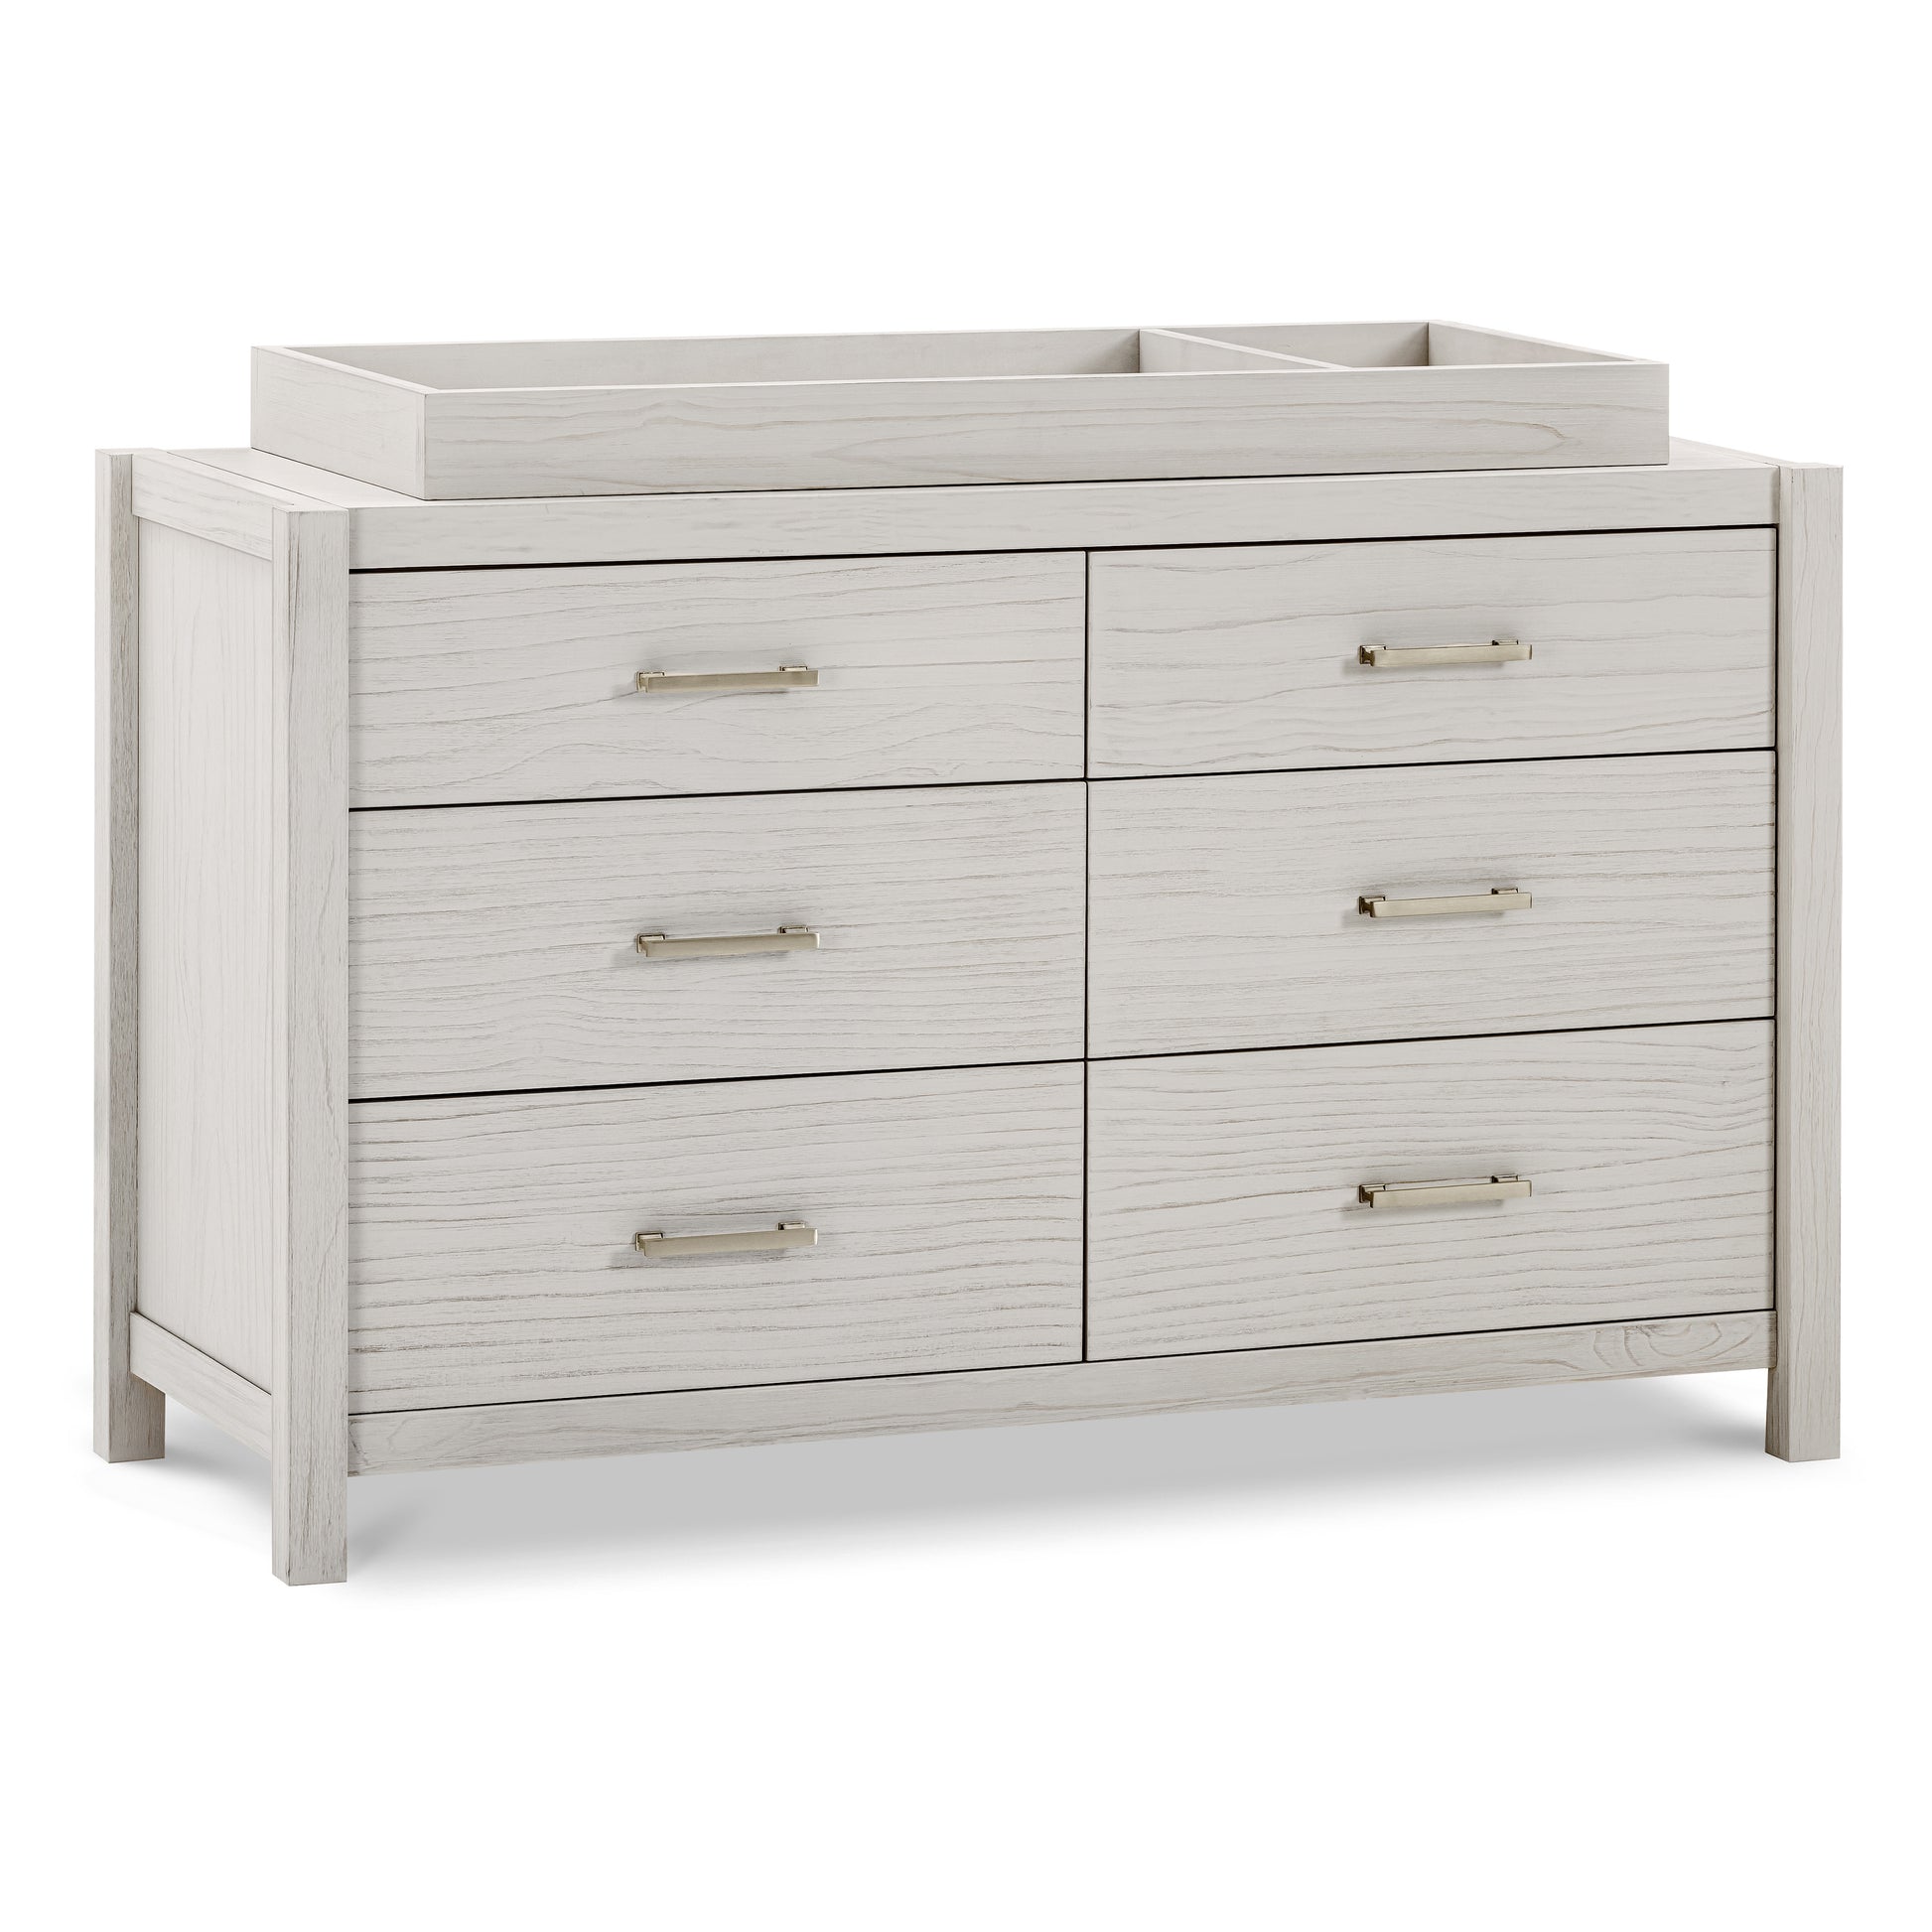 Hemsted 6-Drawer Assembled Dresser- White Driftwood - Twinkle Twinkle Little One